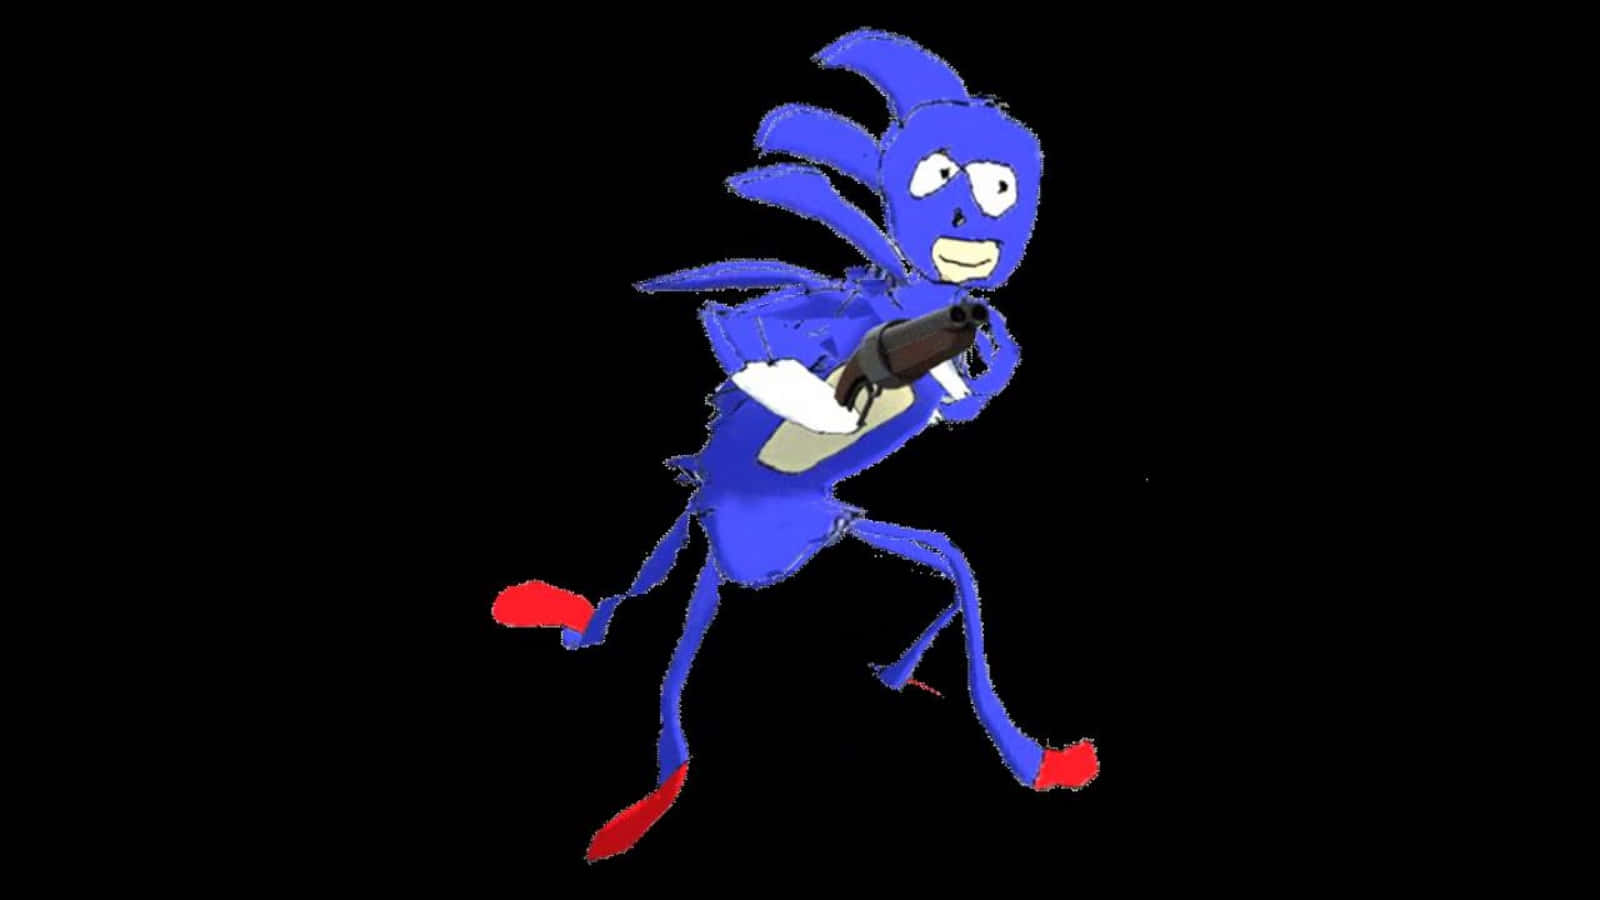 Sanic, The Speedy Blue Hedgehog In An Action Pose. Wallpaper